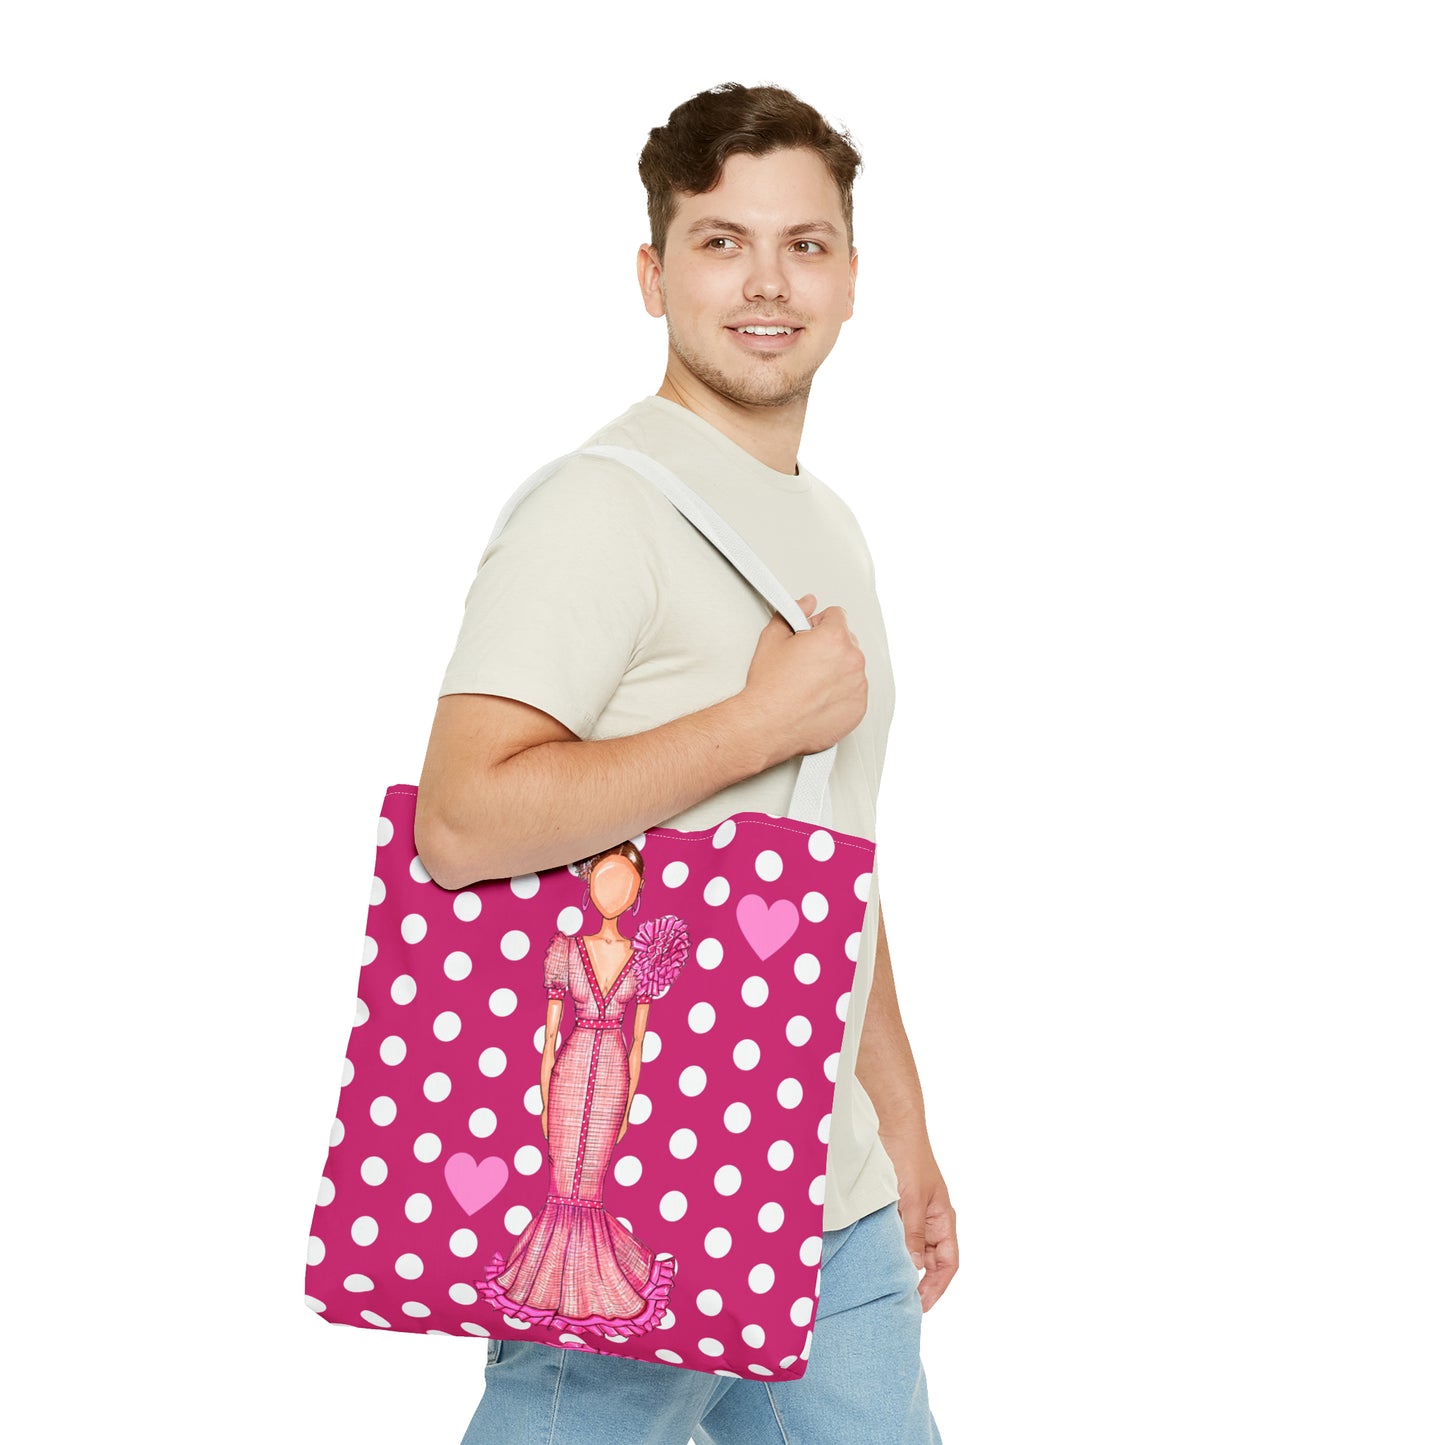 a man is holding a pink polka dot bag